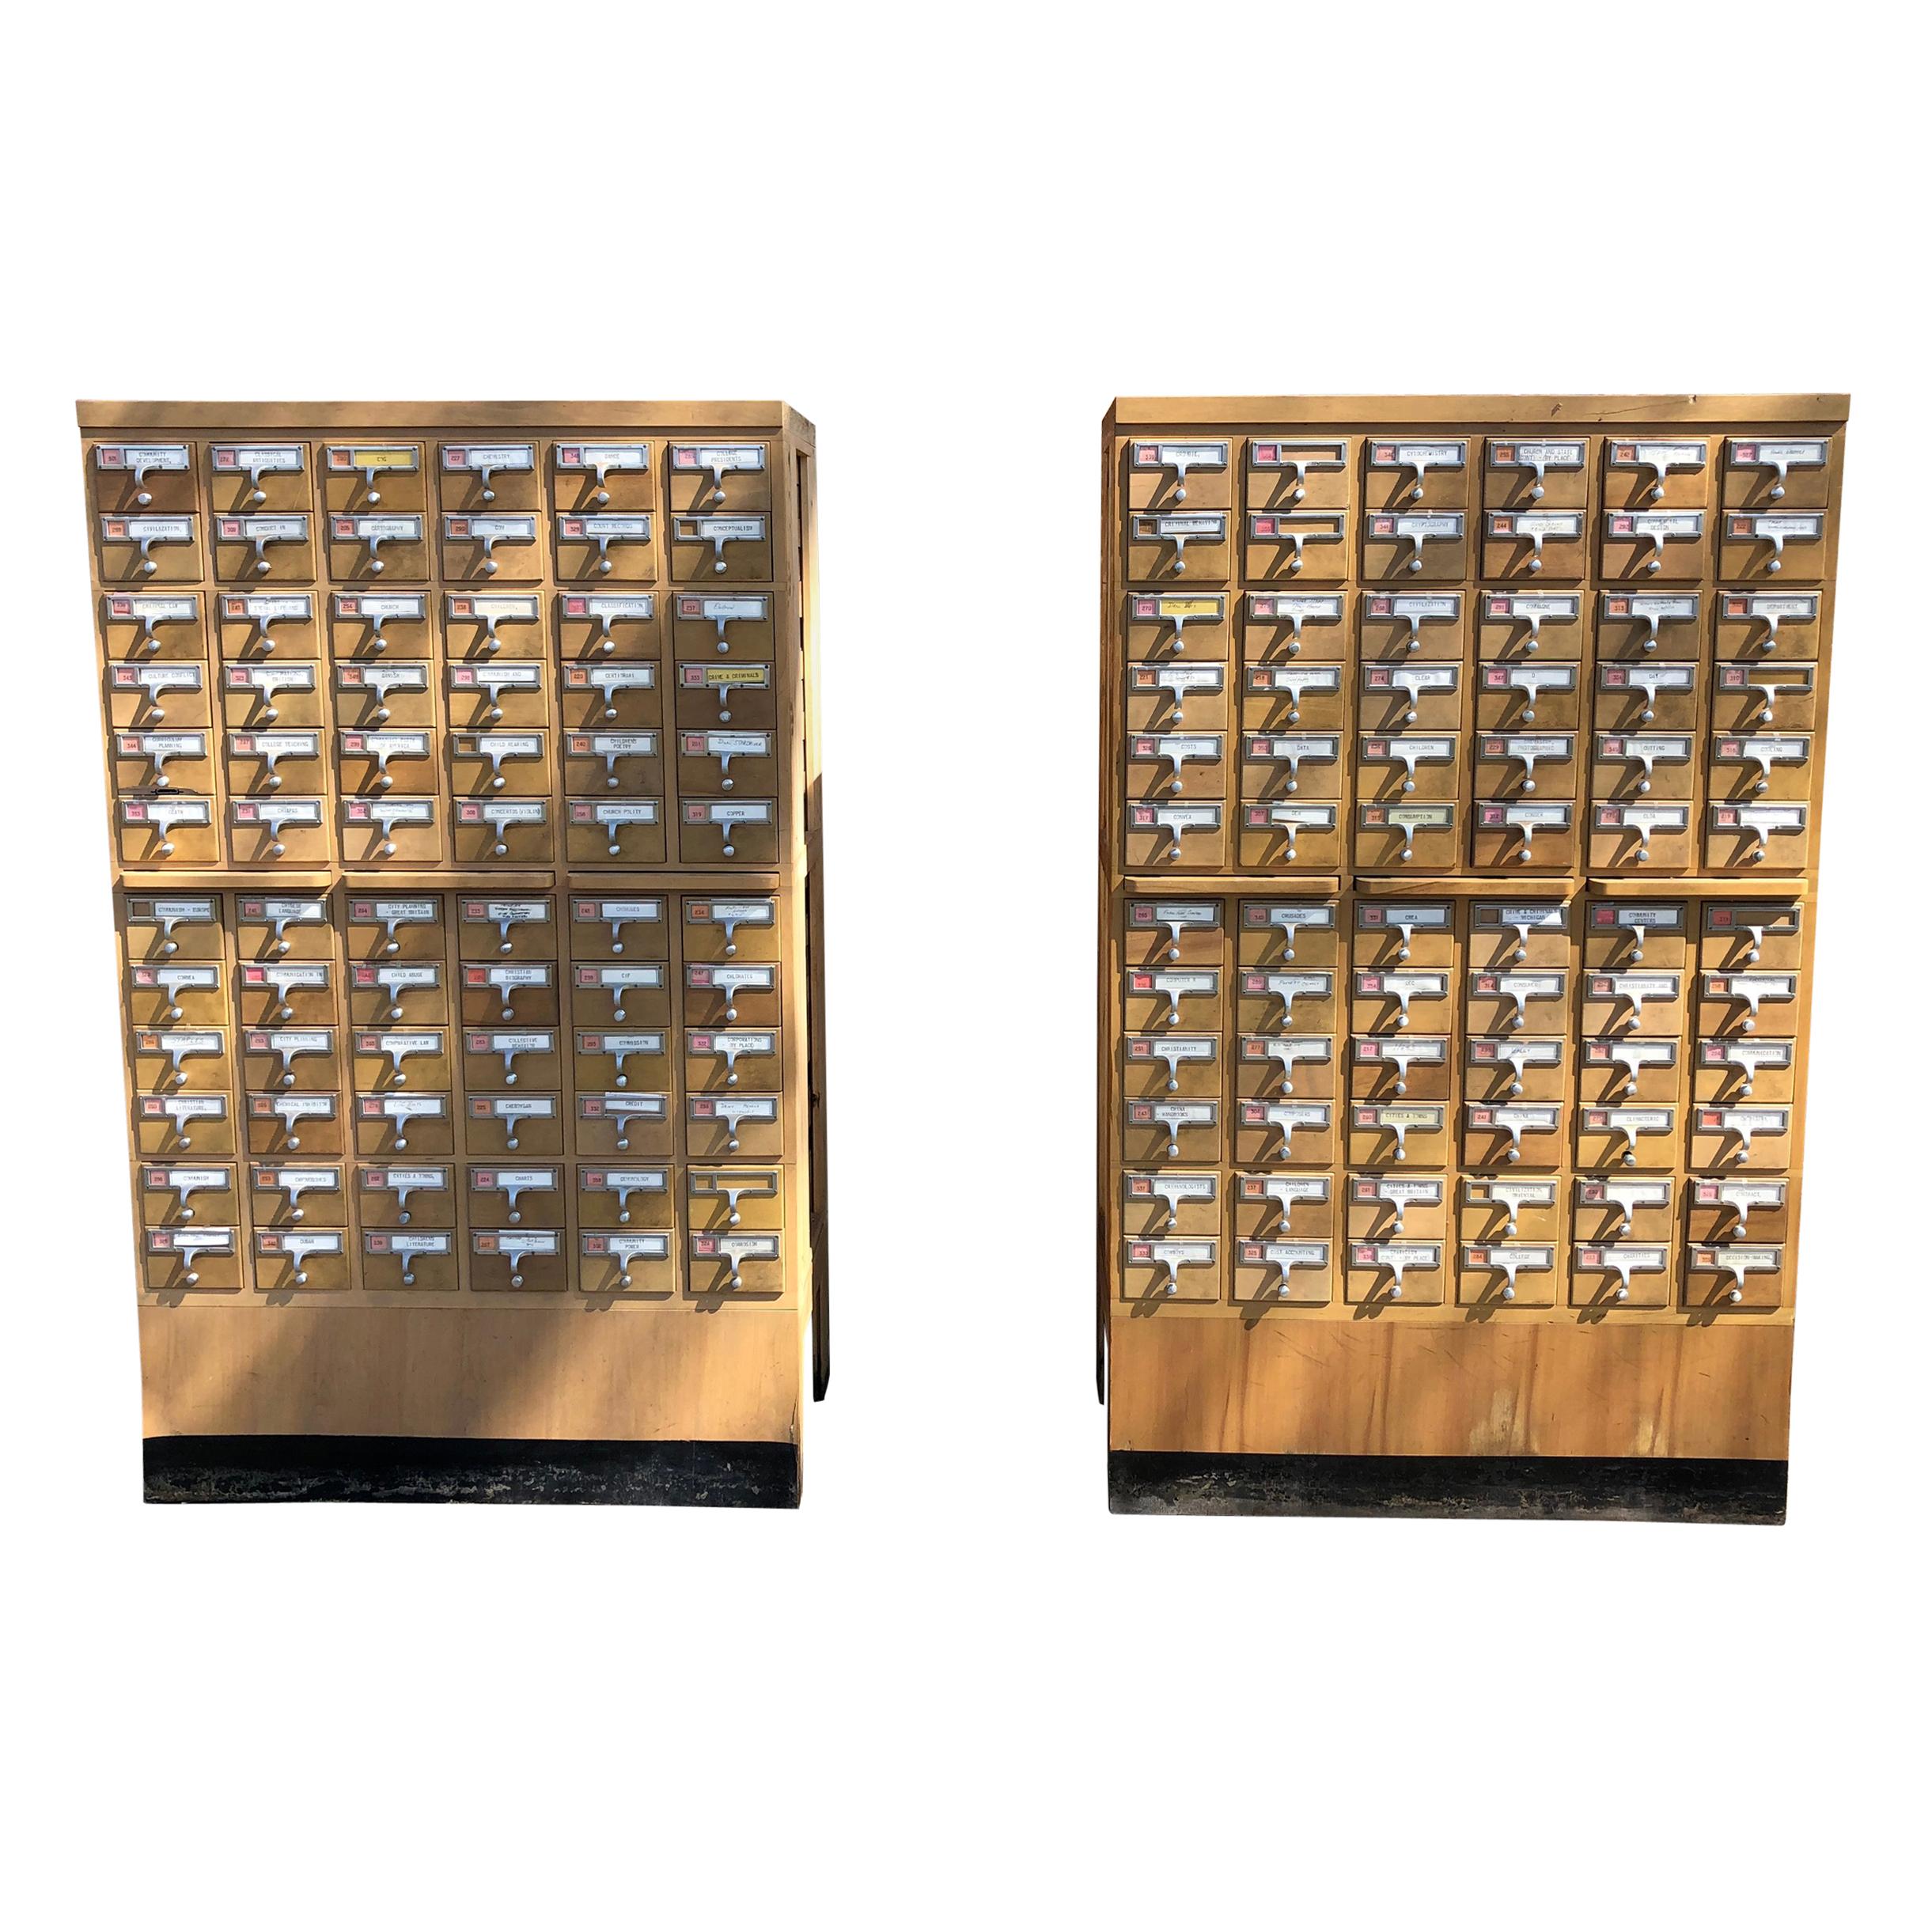 Midcentury 72-Drawer Library Card Catalog, One Available